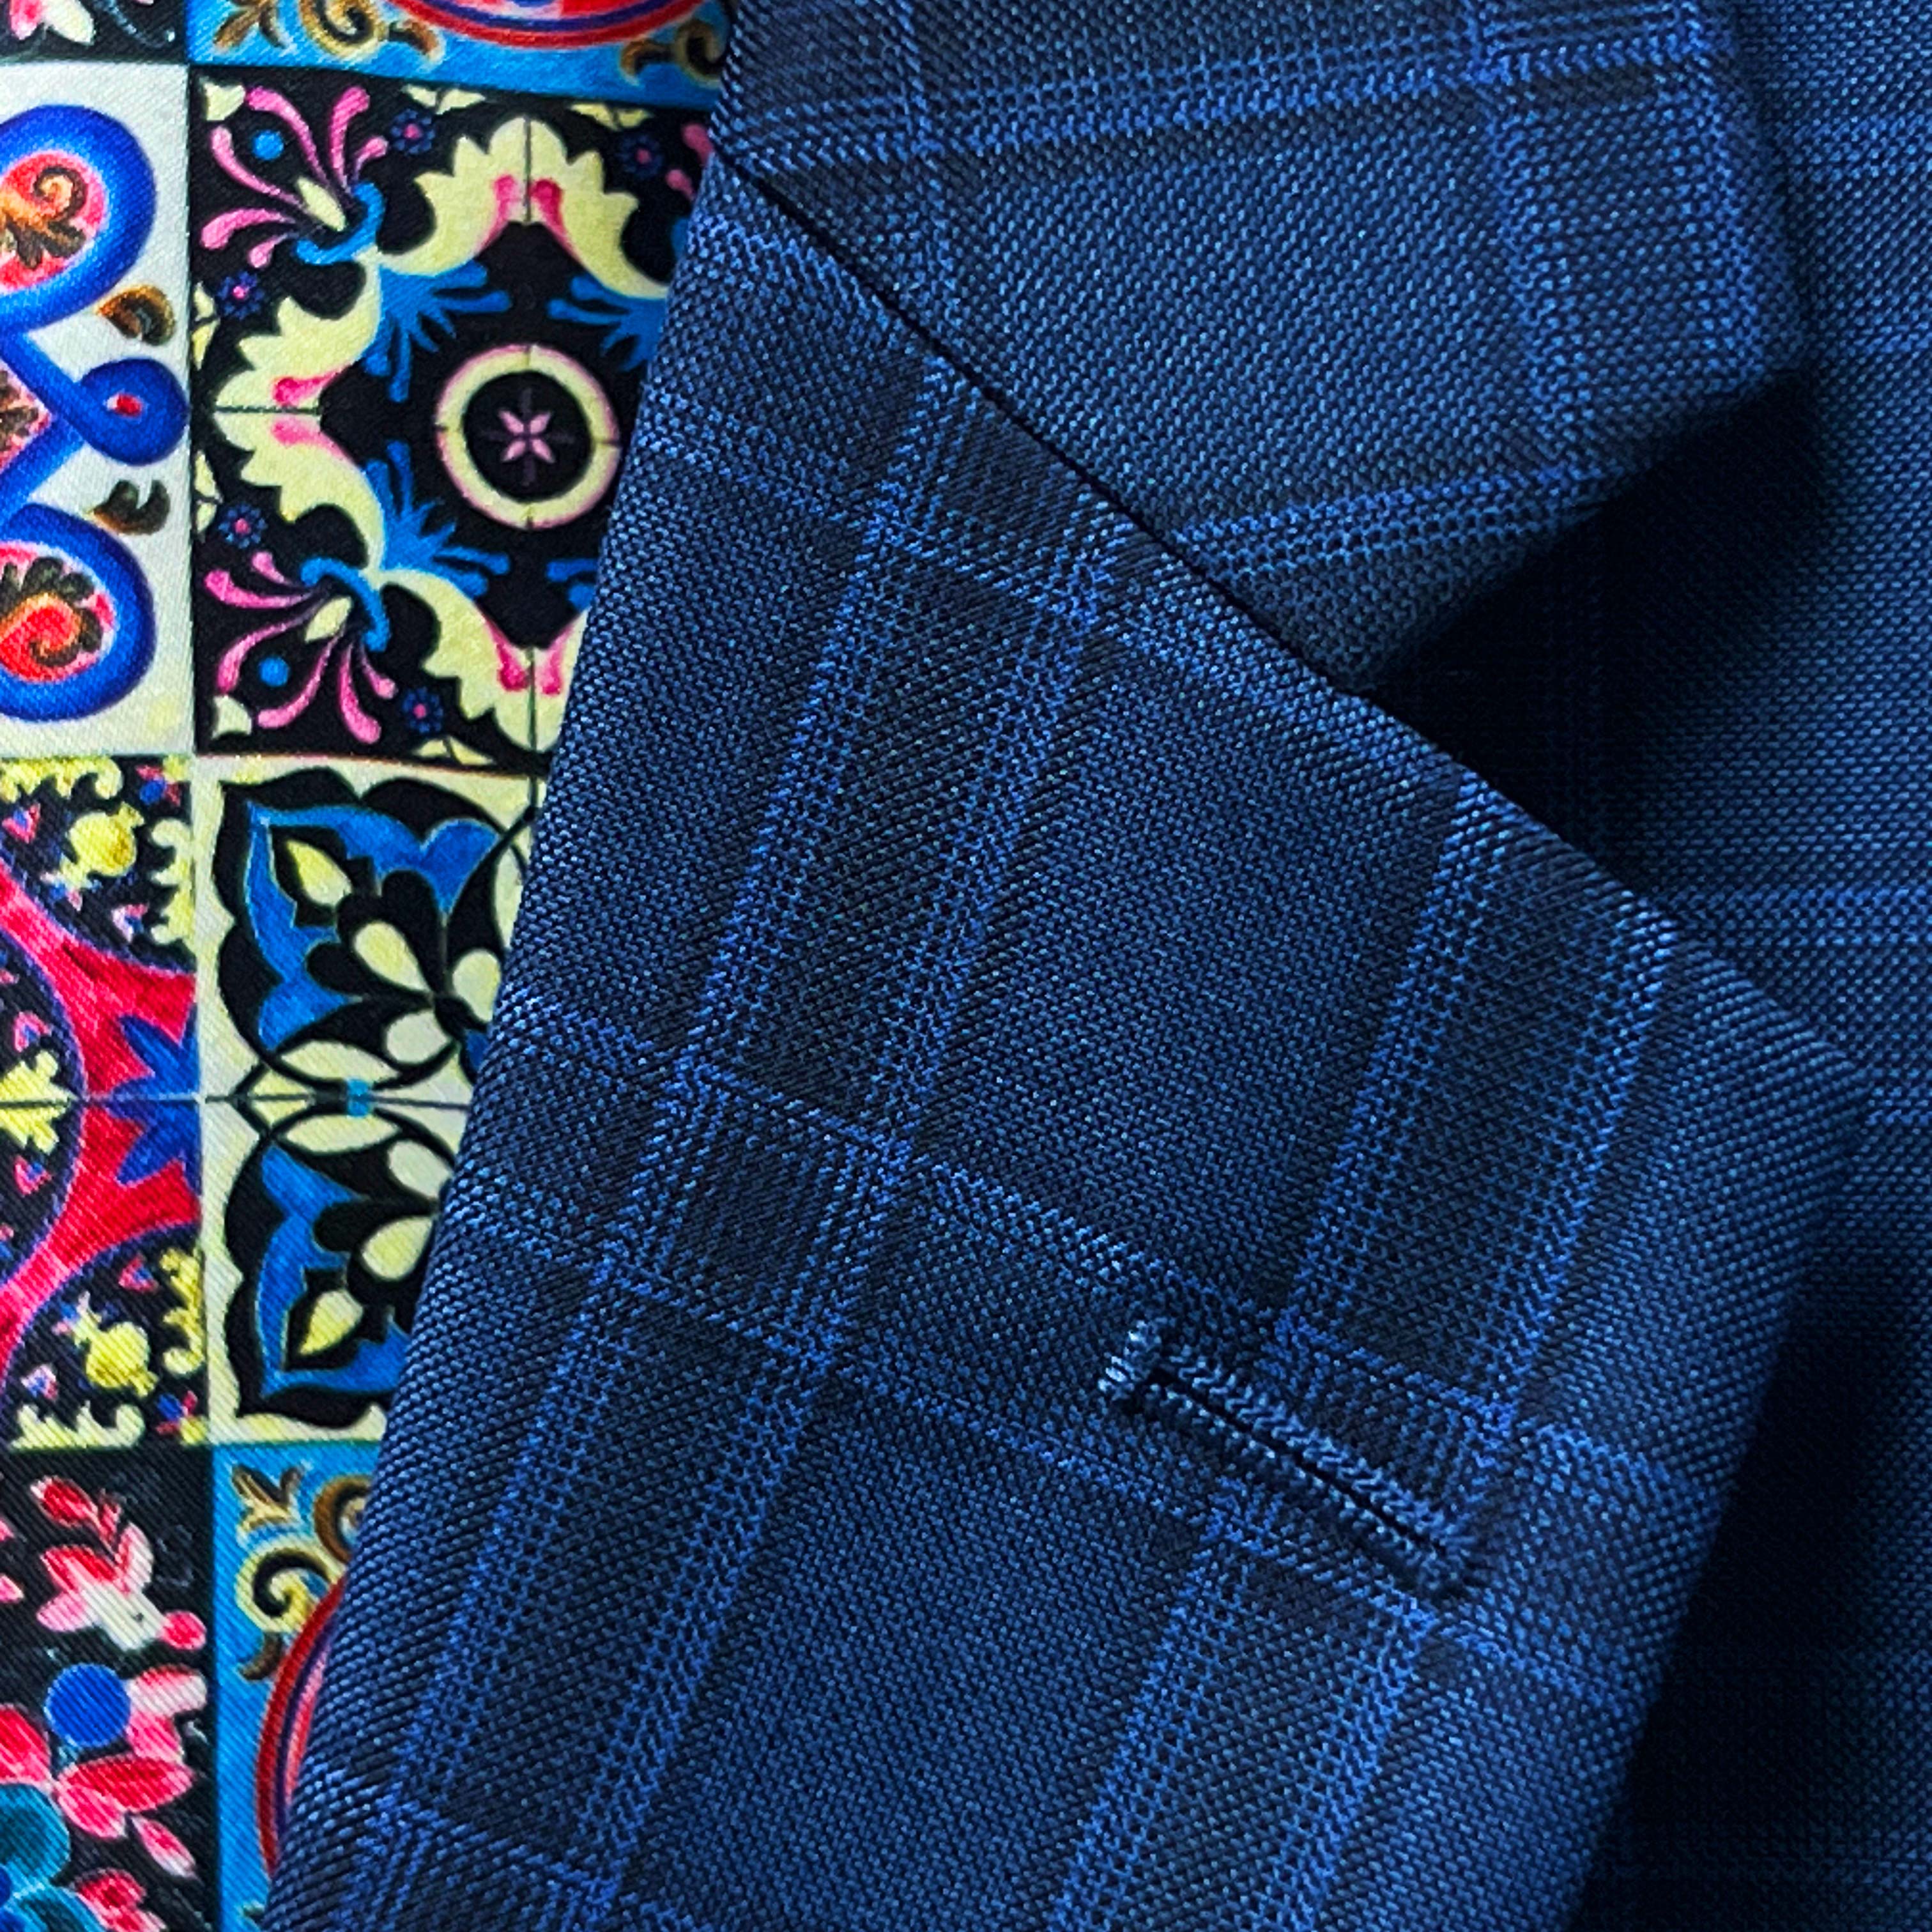 Tailored wedding suits in a unique blue checkered pattern, made from luxurious Merino Wool.